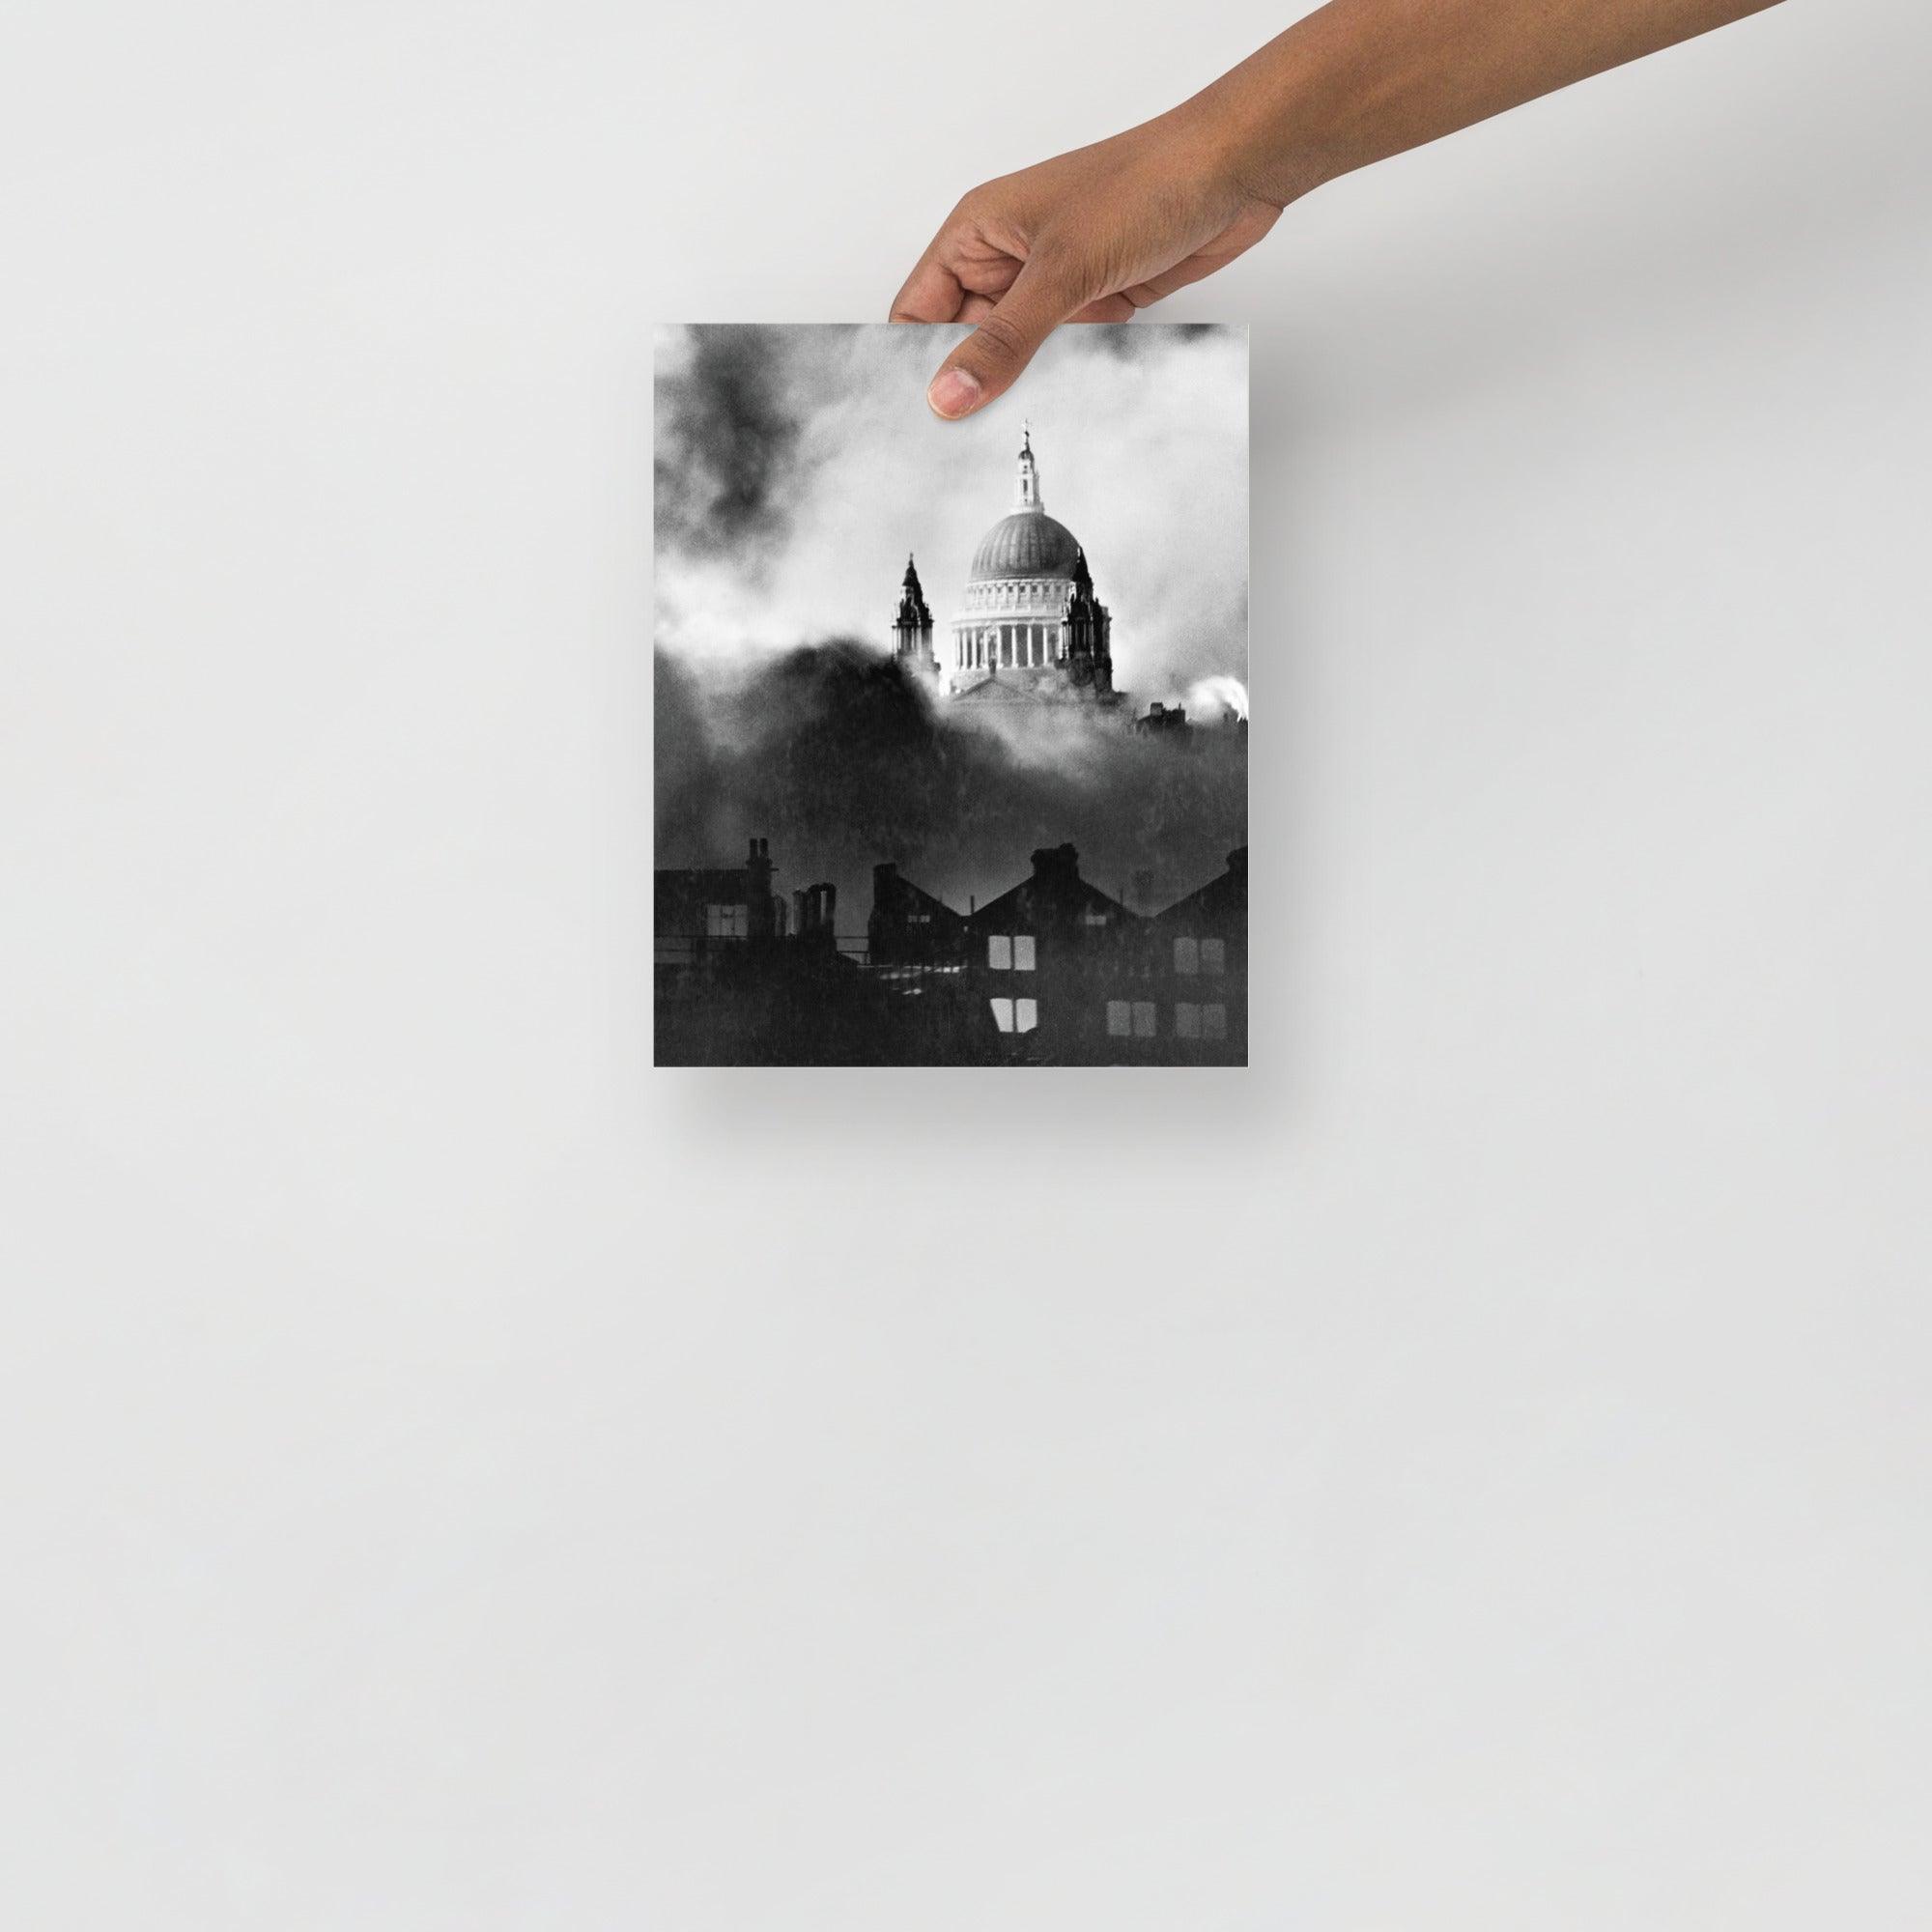 A St Paul's Survives poster on a plain backdrop in size 8x10”.